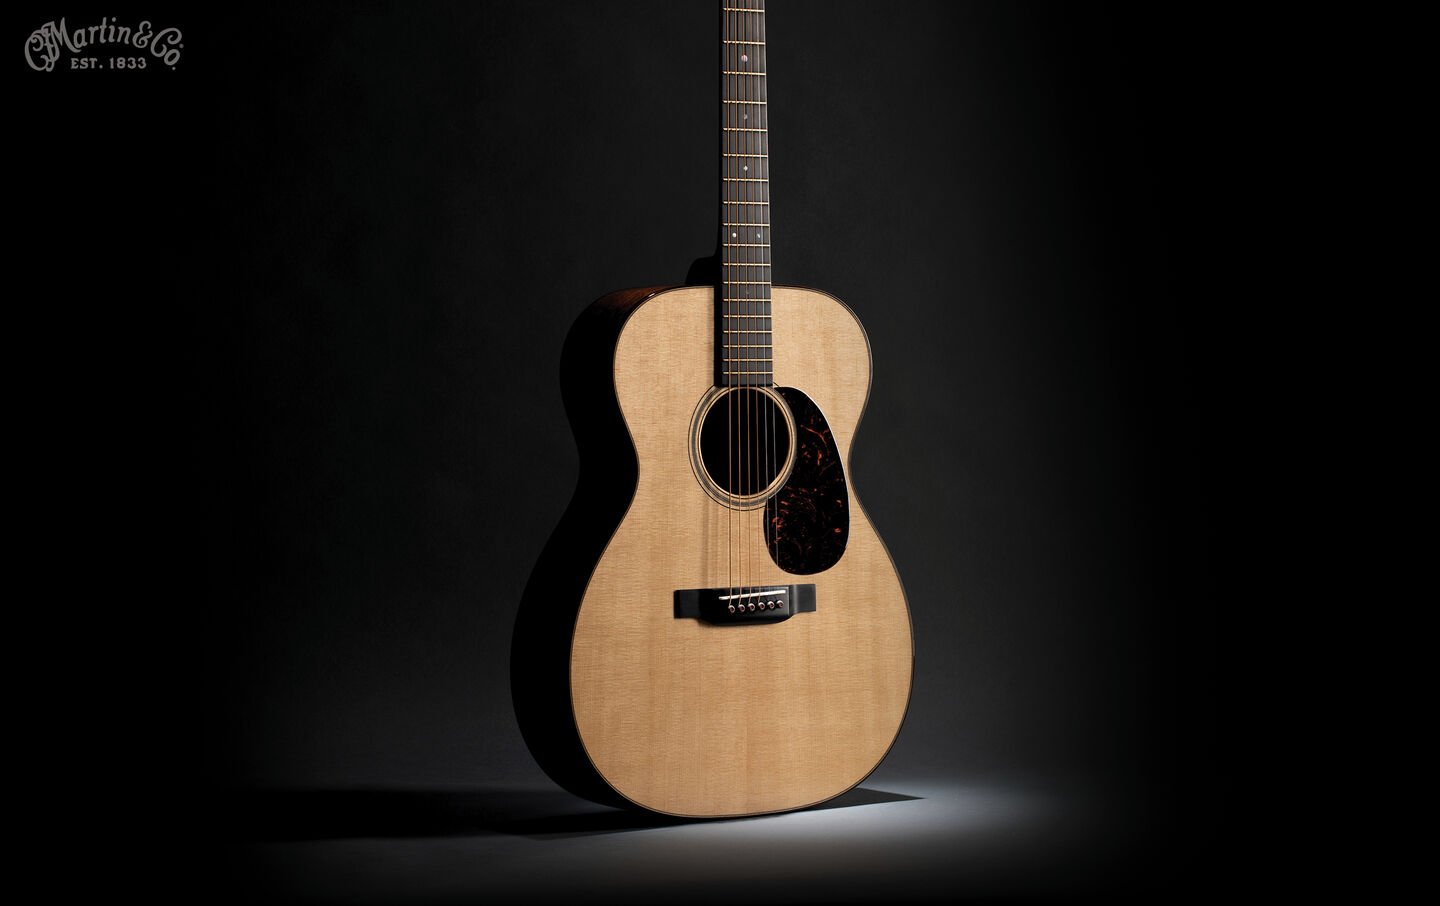 A photo of an acoustic guitar lit up dramatically against a black background